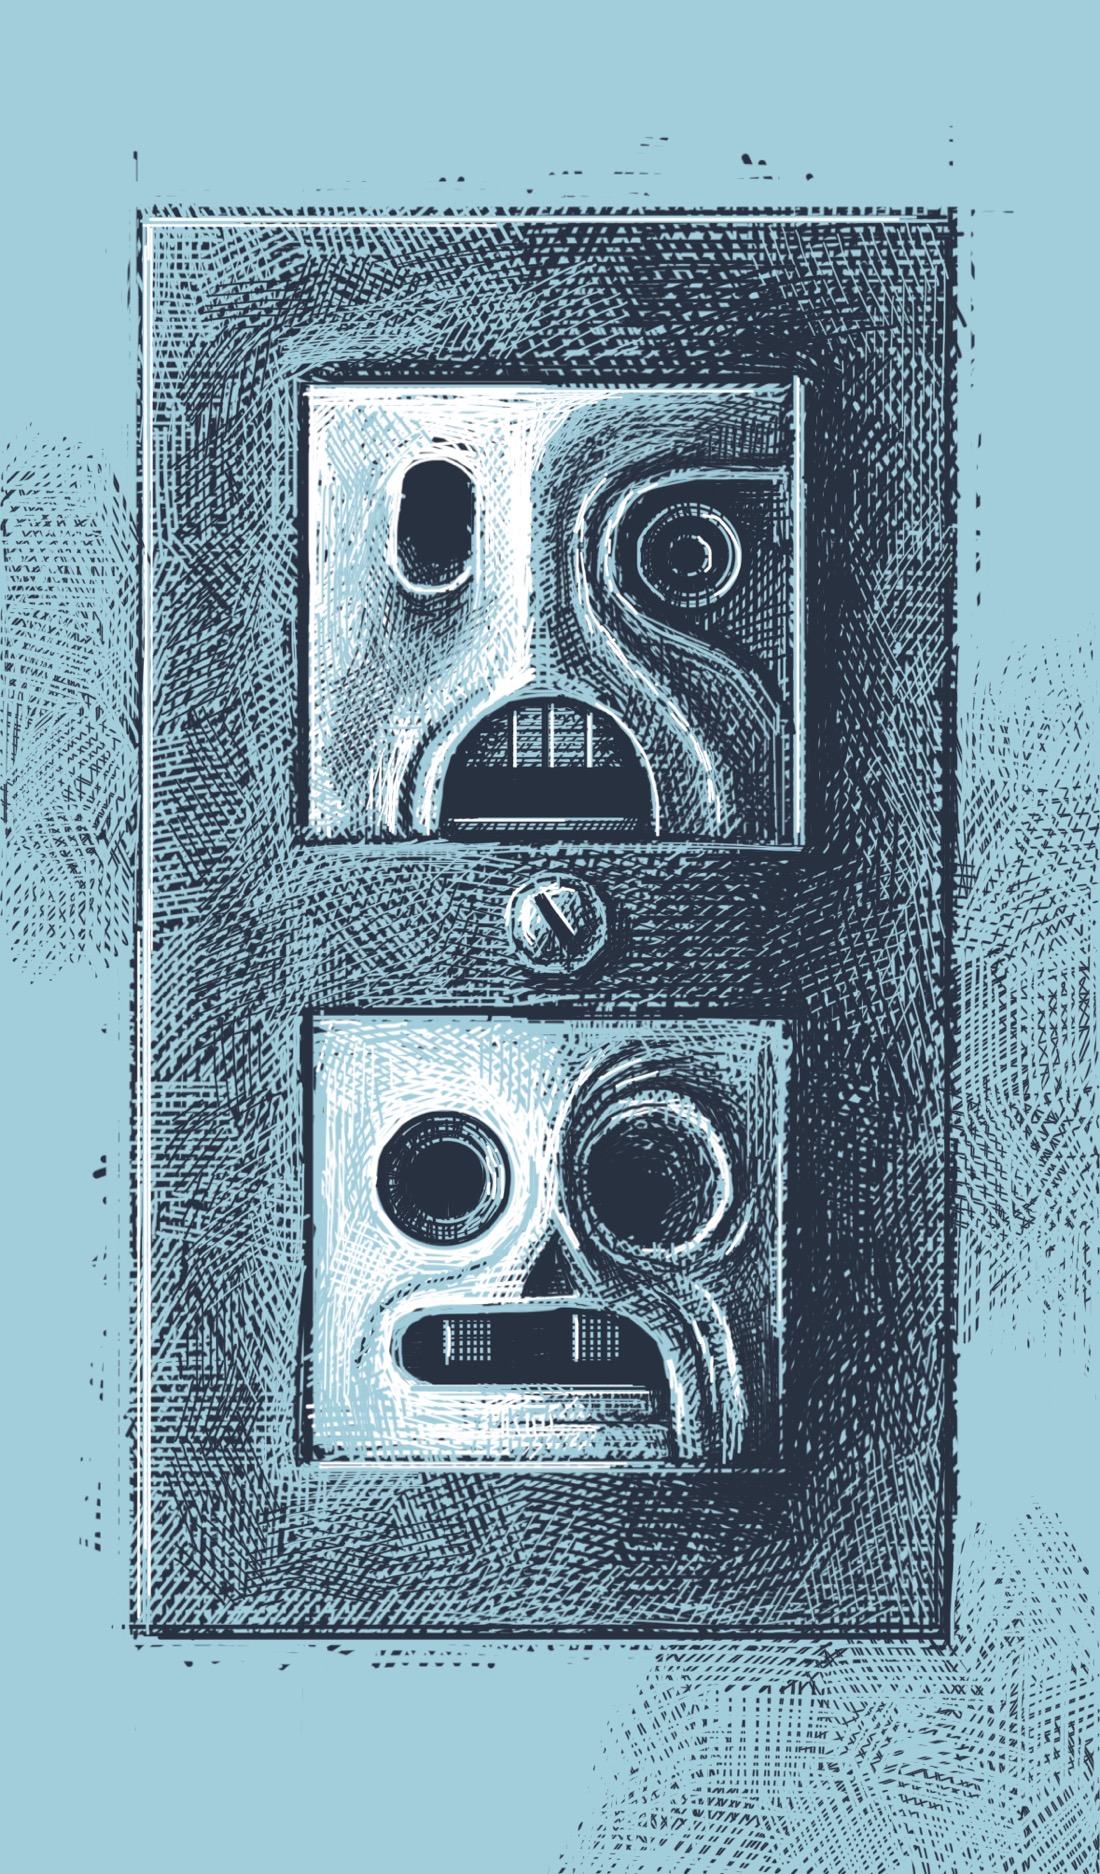 An electrical outlet where the two receptacles look like little demon faces